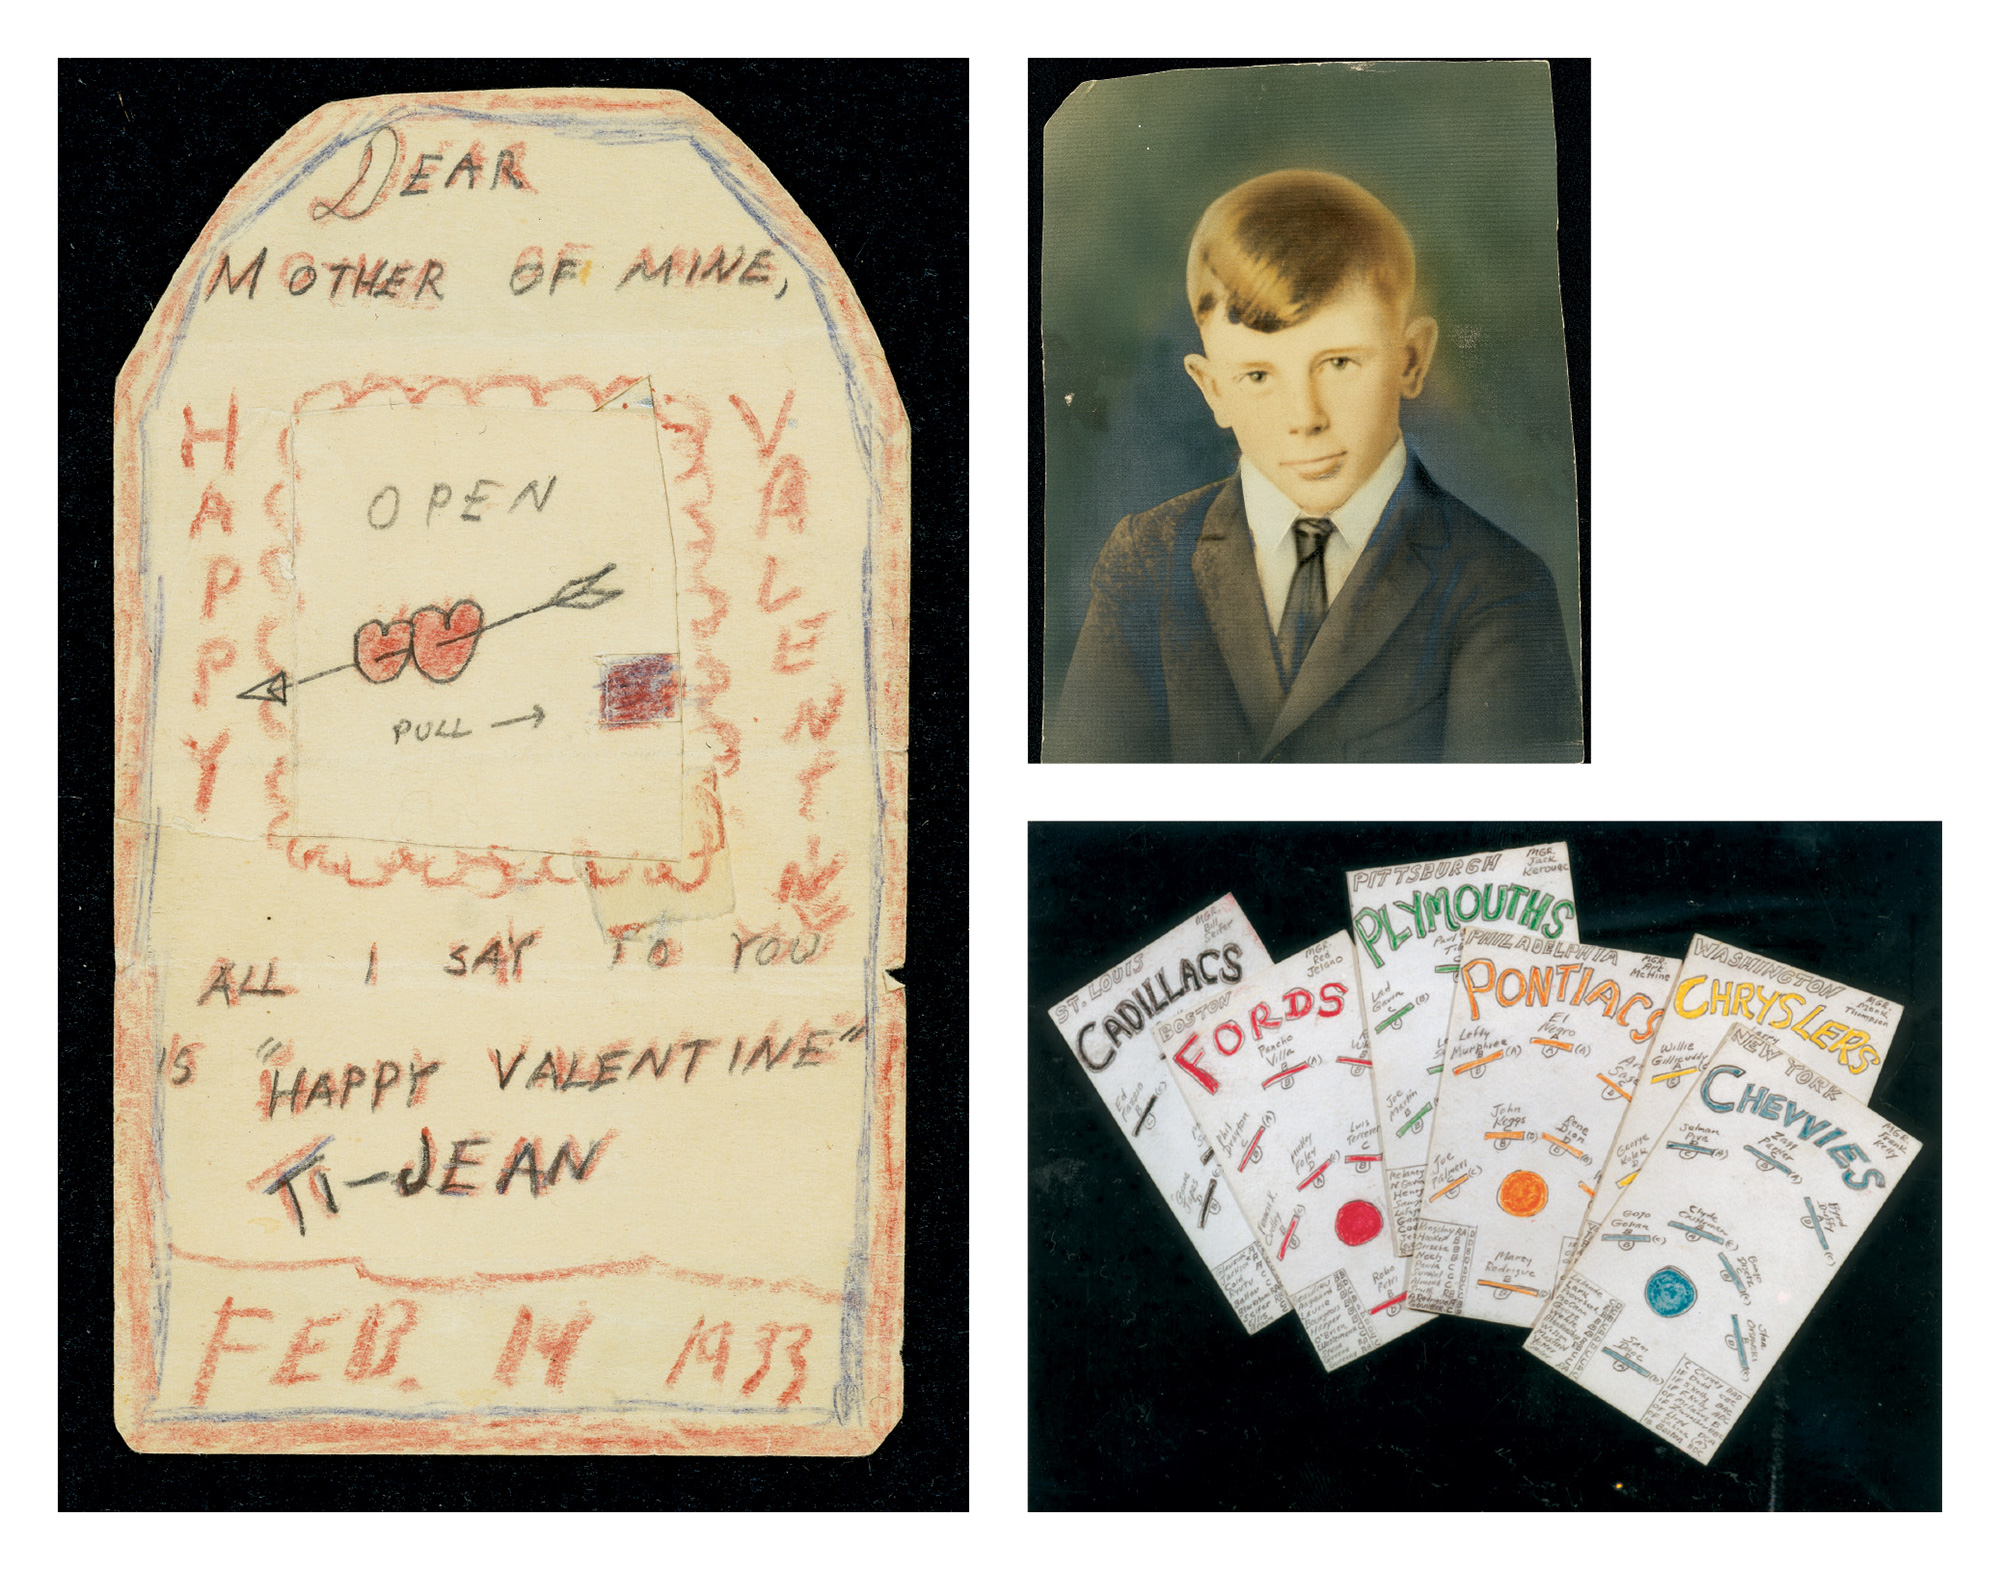 Three images: a photograph of a Valentine’s Day card made by Jack Kerouac for his mother, 14 February 1933; a photograph of the novelist as a boy; and team cards Kerouac made around 1936 for his fantasy baseball league.